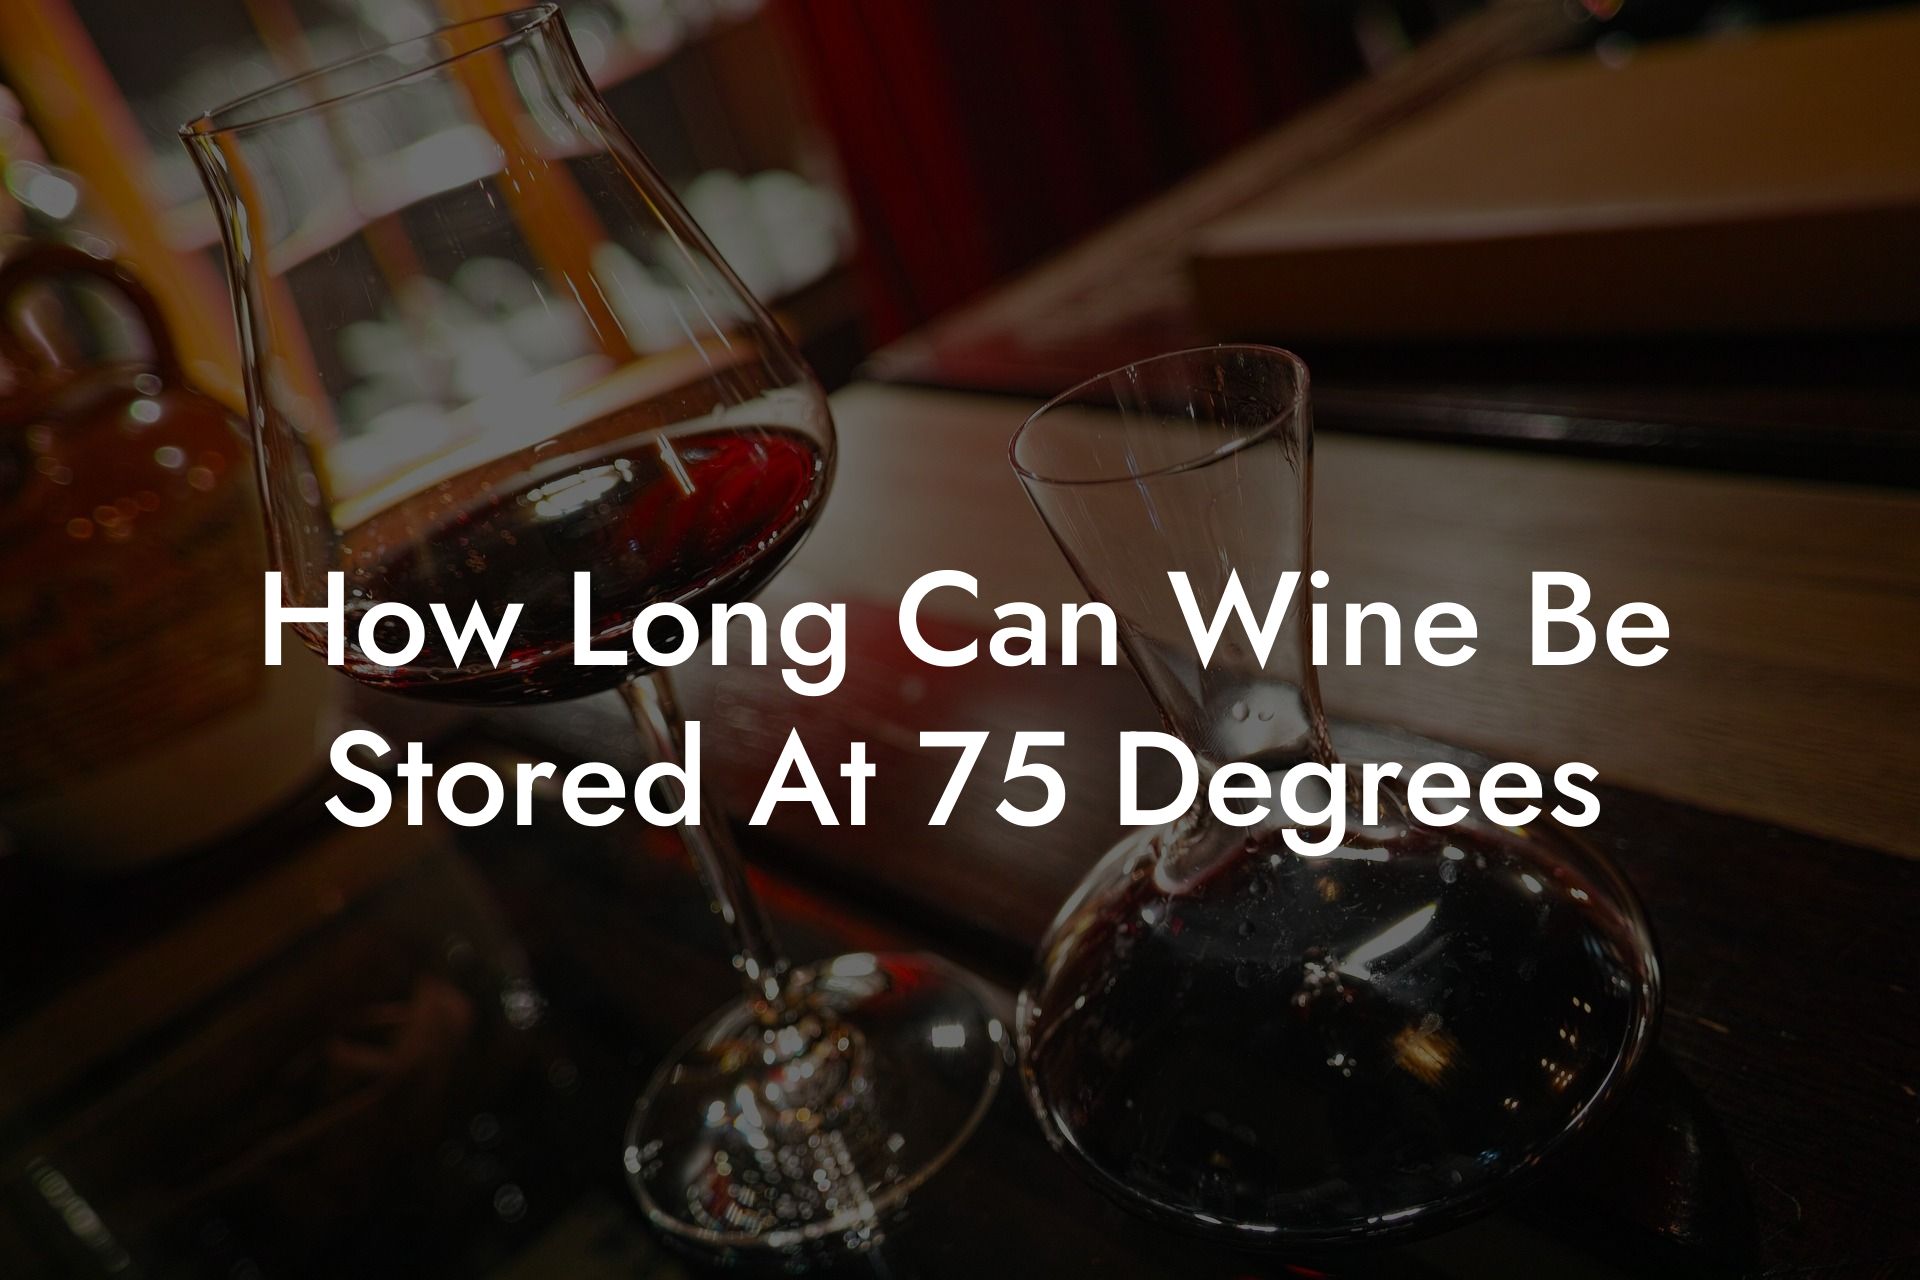 How Long Can Wine Be Stored At 75 Degrees